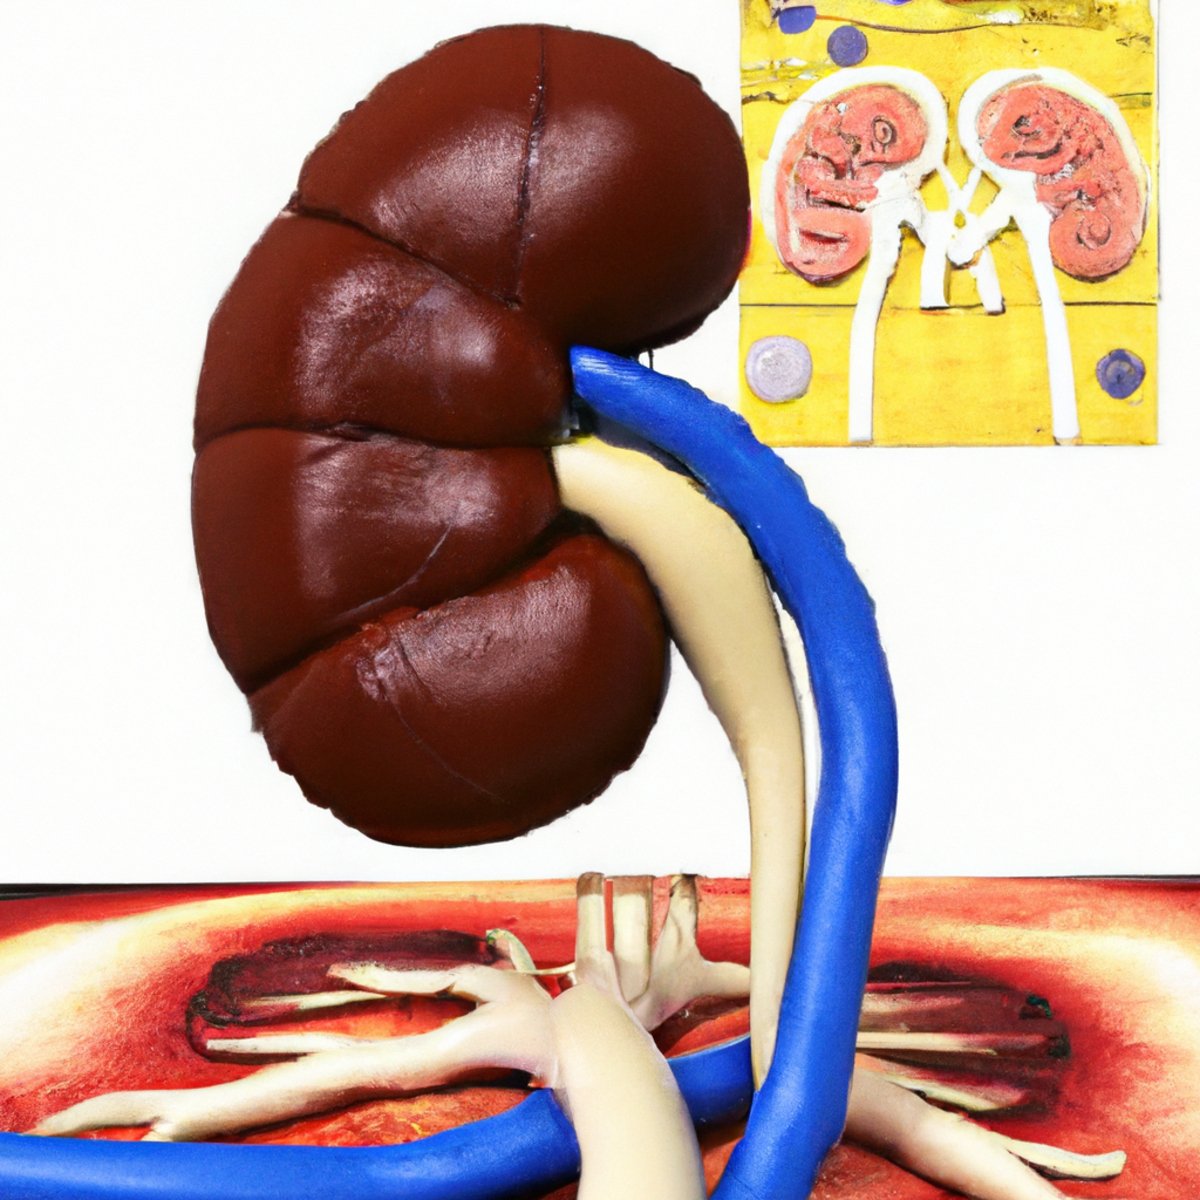 Close-up of kidney model against medical equipment, highlighting intricate structure and details, symbolizing scientific approach to understanding Fabry Disease.